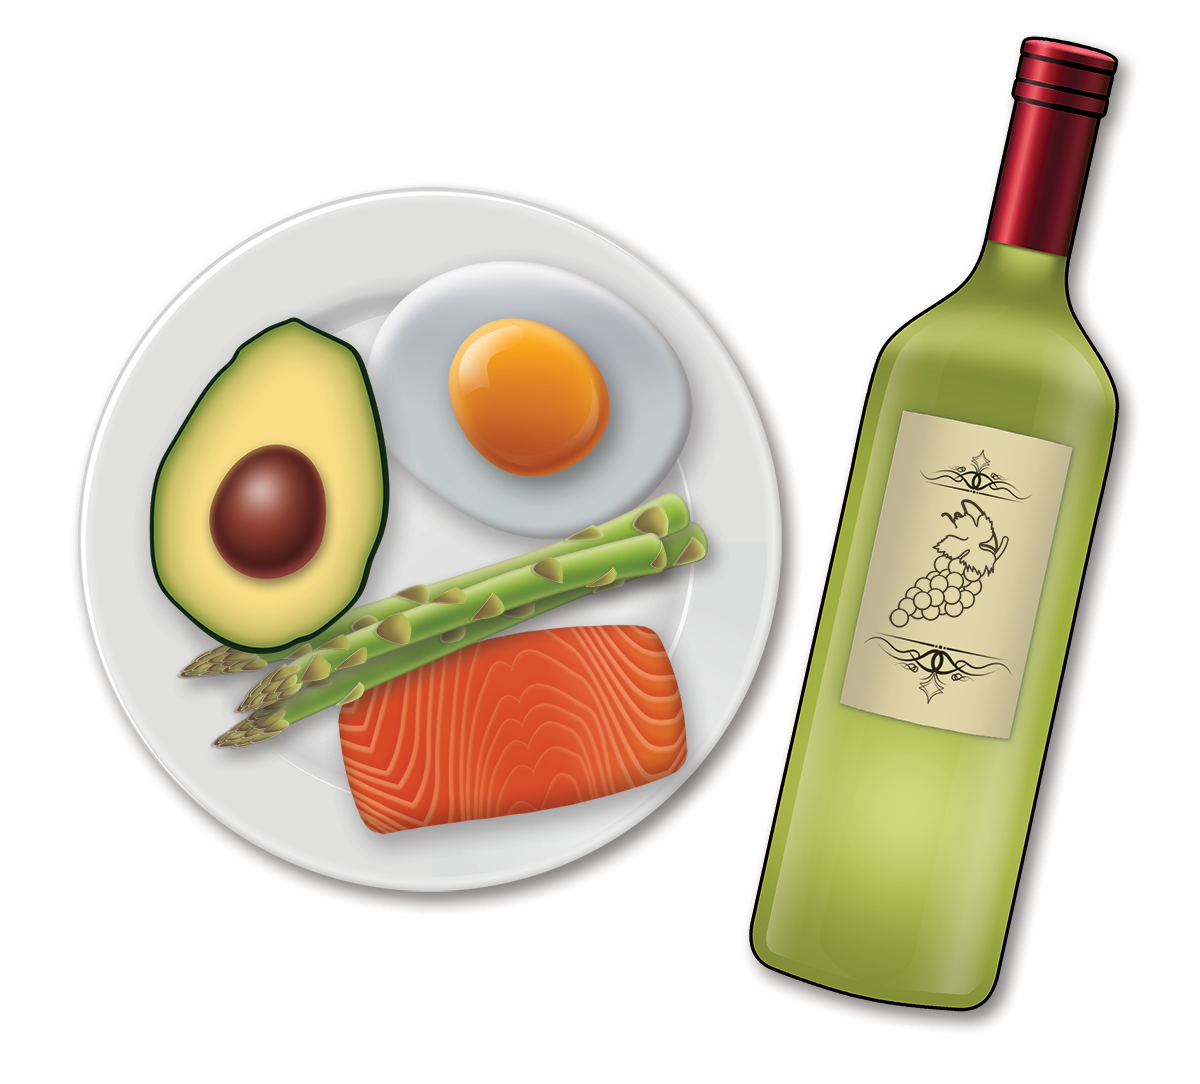 A ketogenic-friendly meal and a bottle of wine